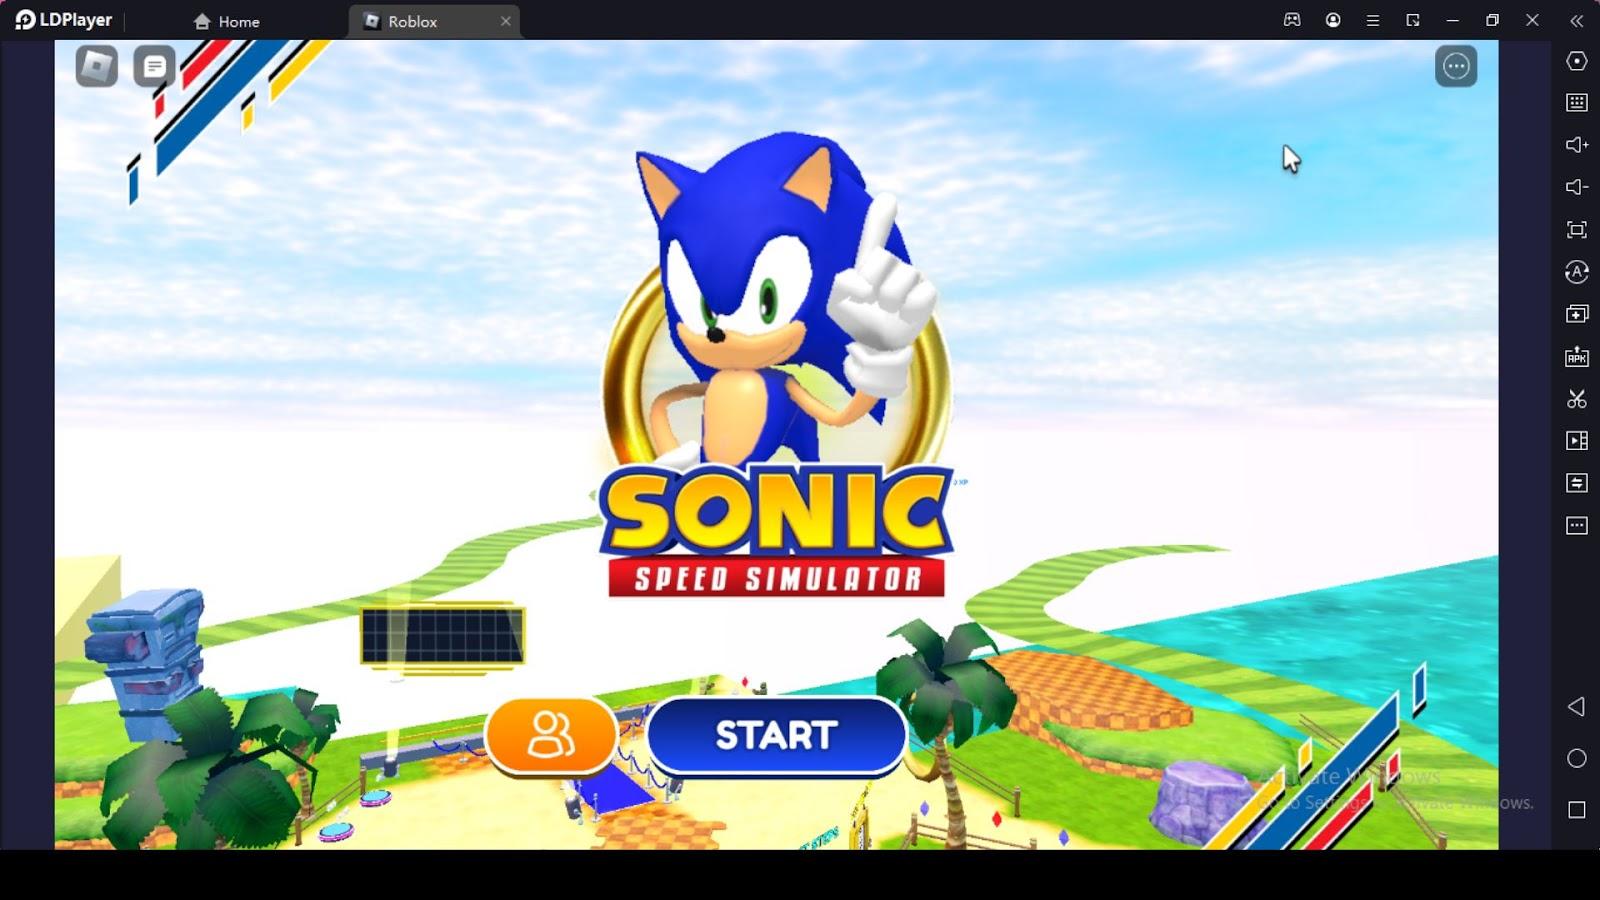 Roblox Sonic Speed Simulator Guide for Beginners with Best Tips